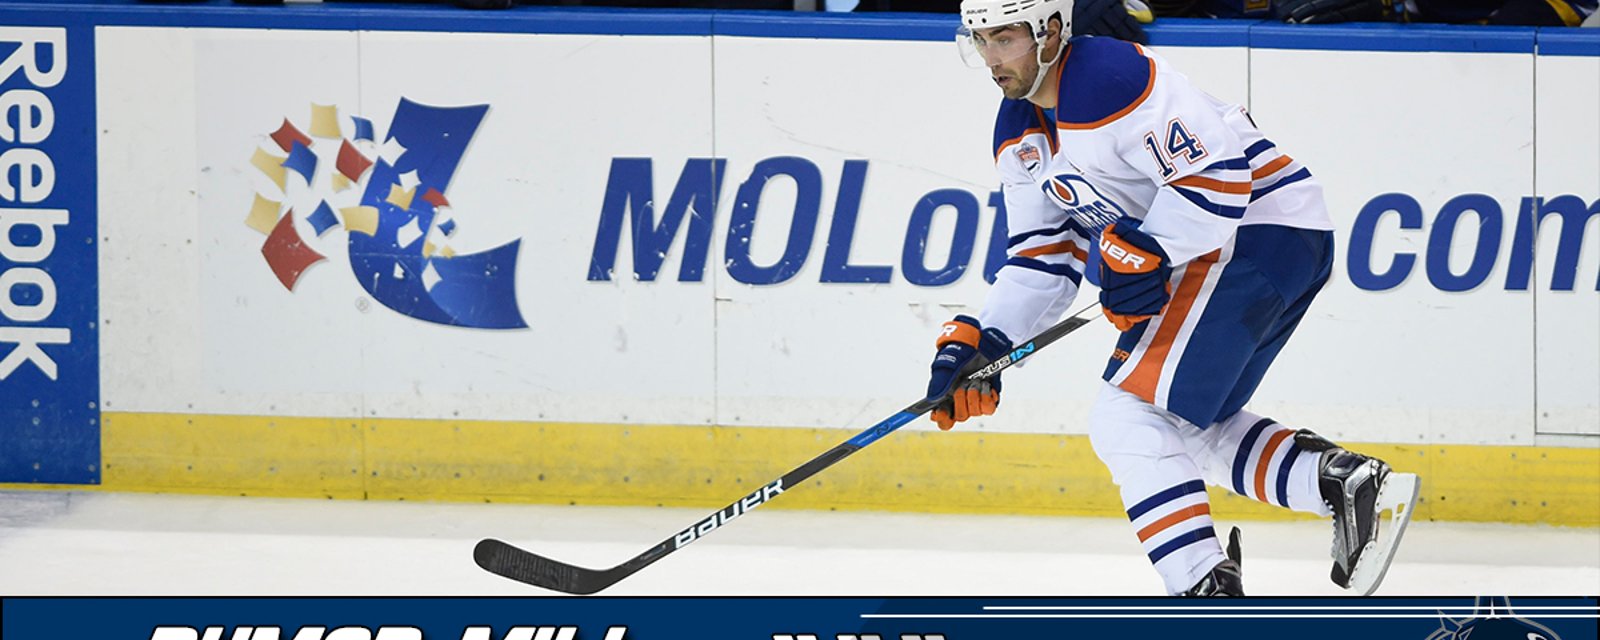 Report: Should the Canucks trade for Eberle?